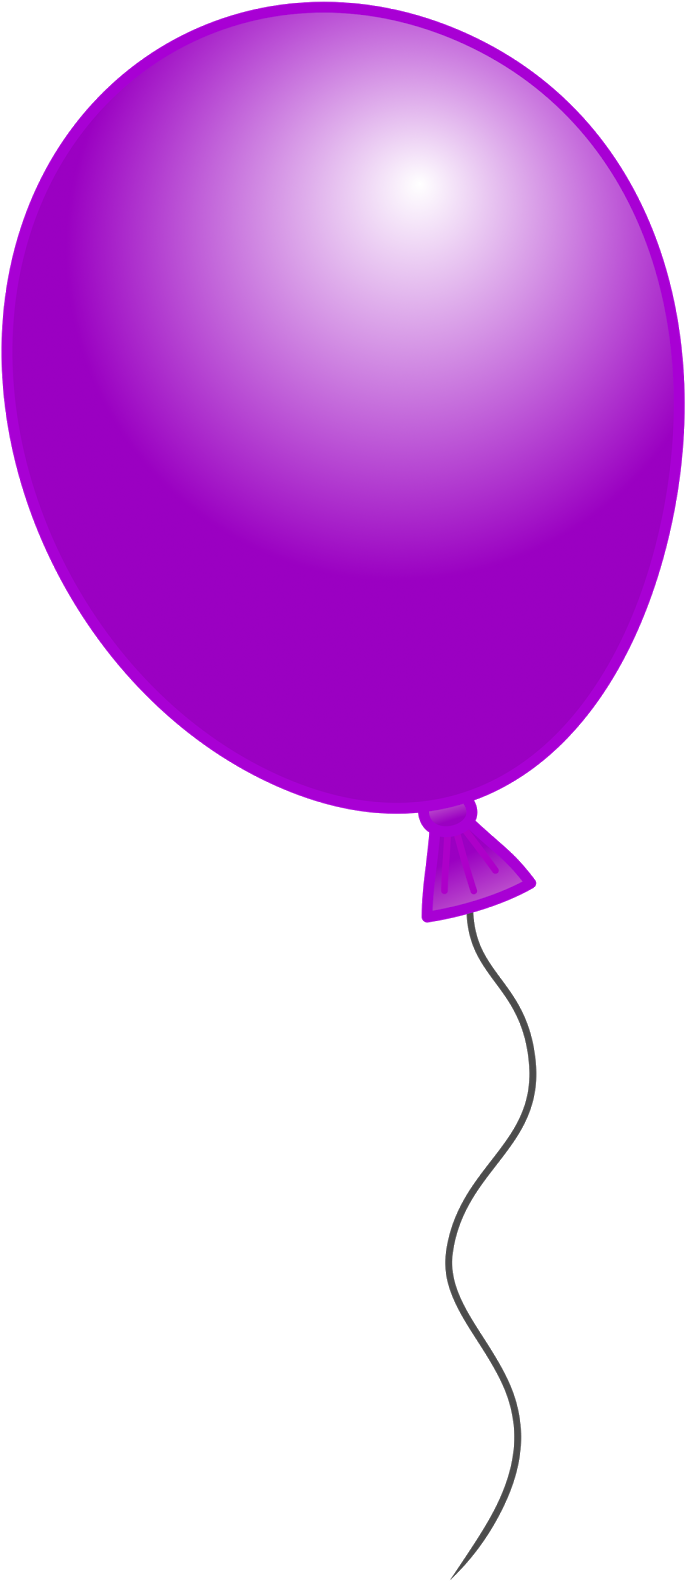 Single Balloon PNG Image Background